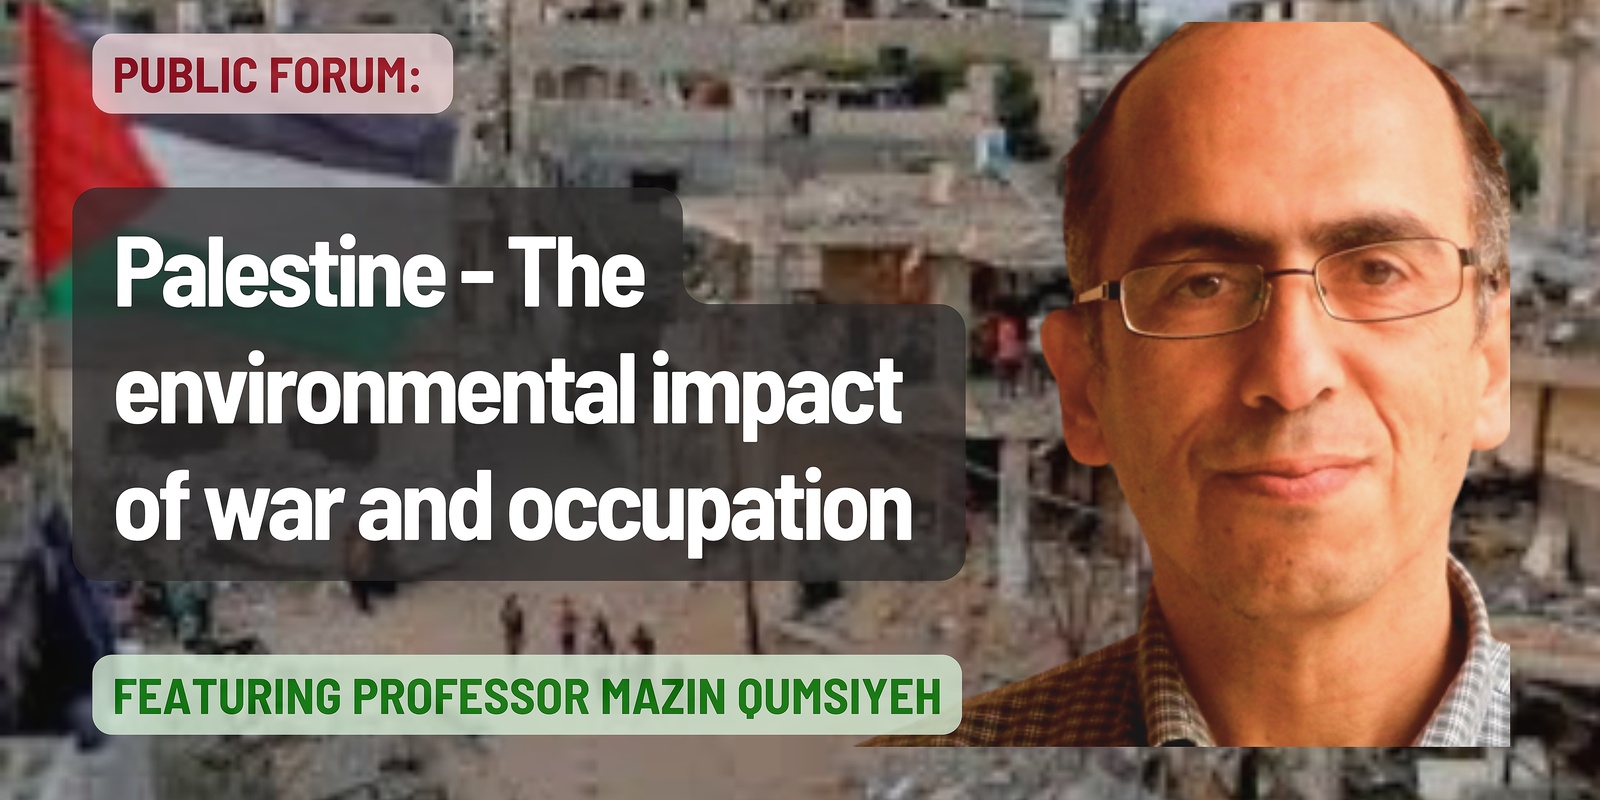 Banner image for Palestine: The Environmental Impacts of War and Occupation with Prof Mazin Qumisiyeh